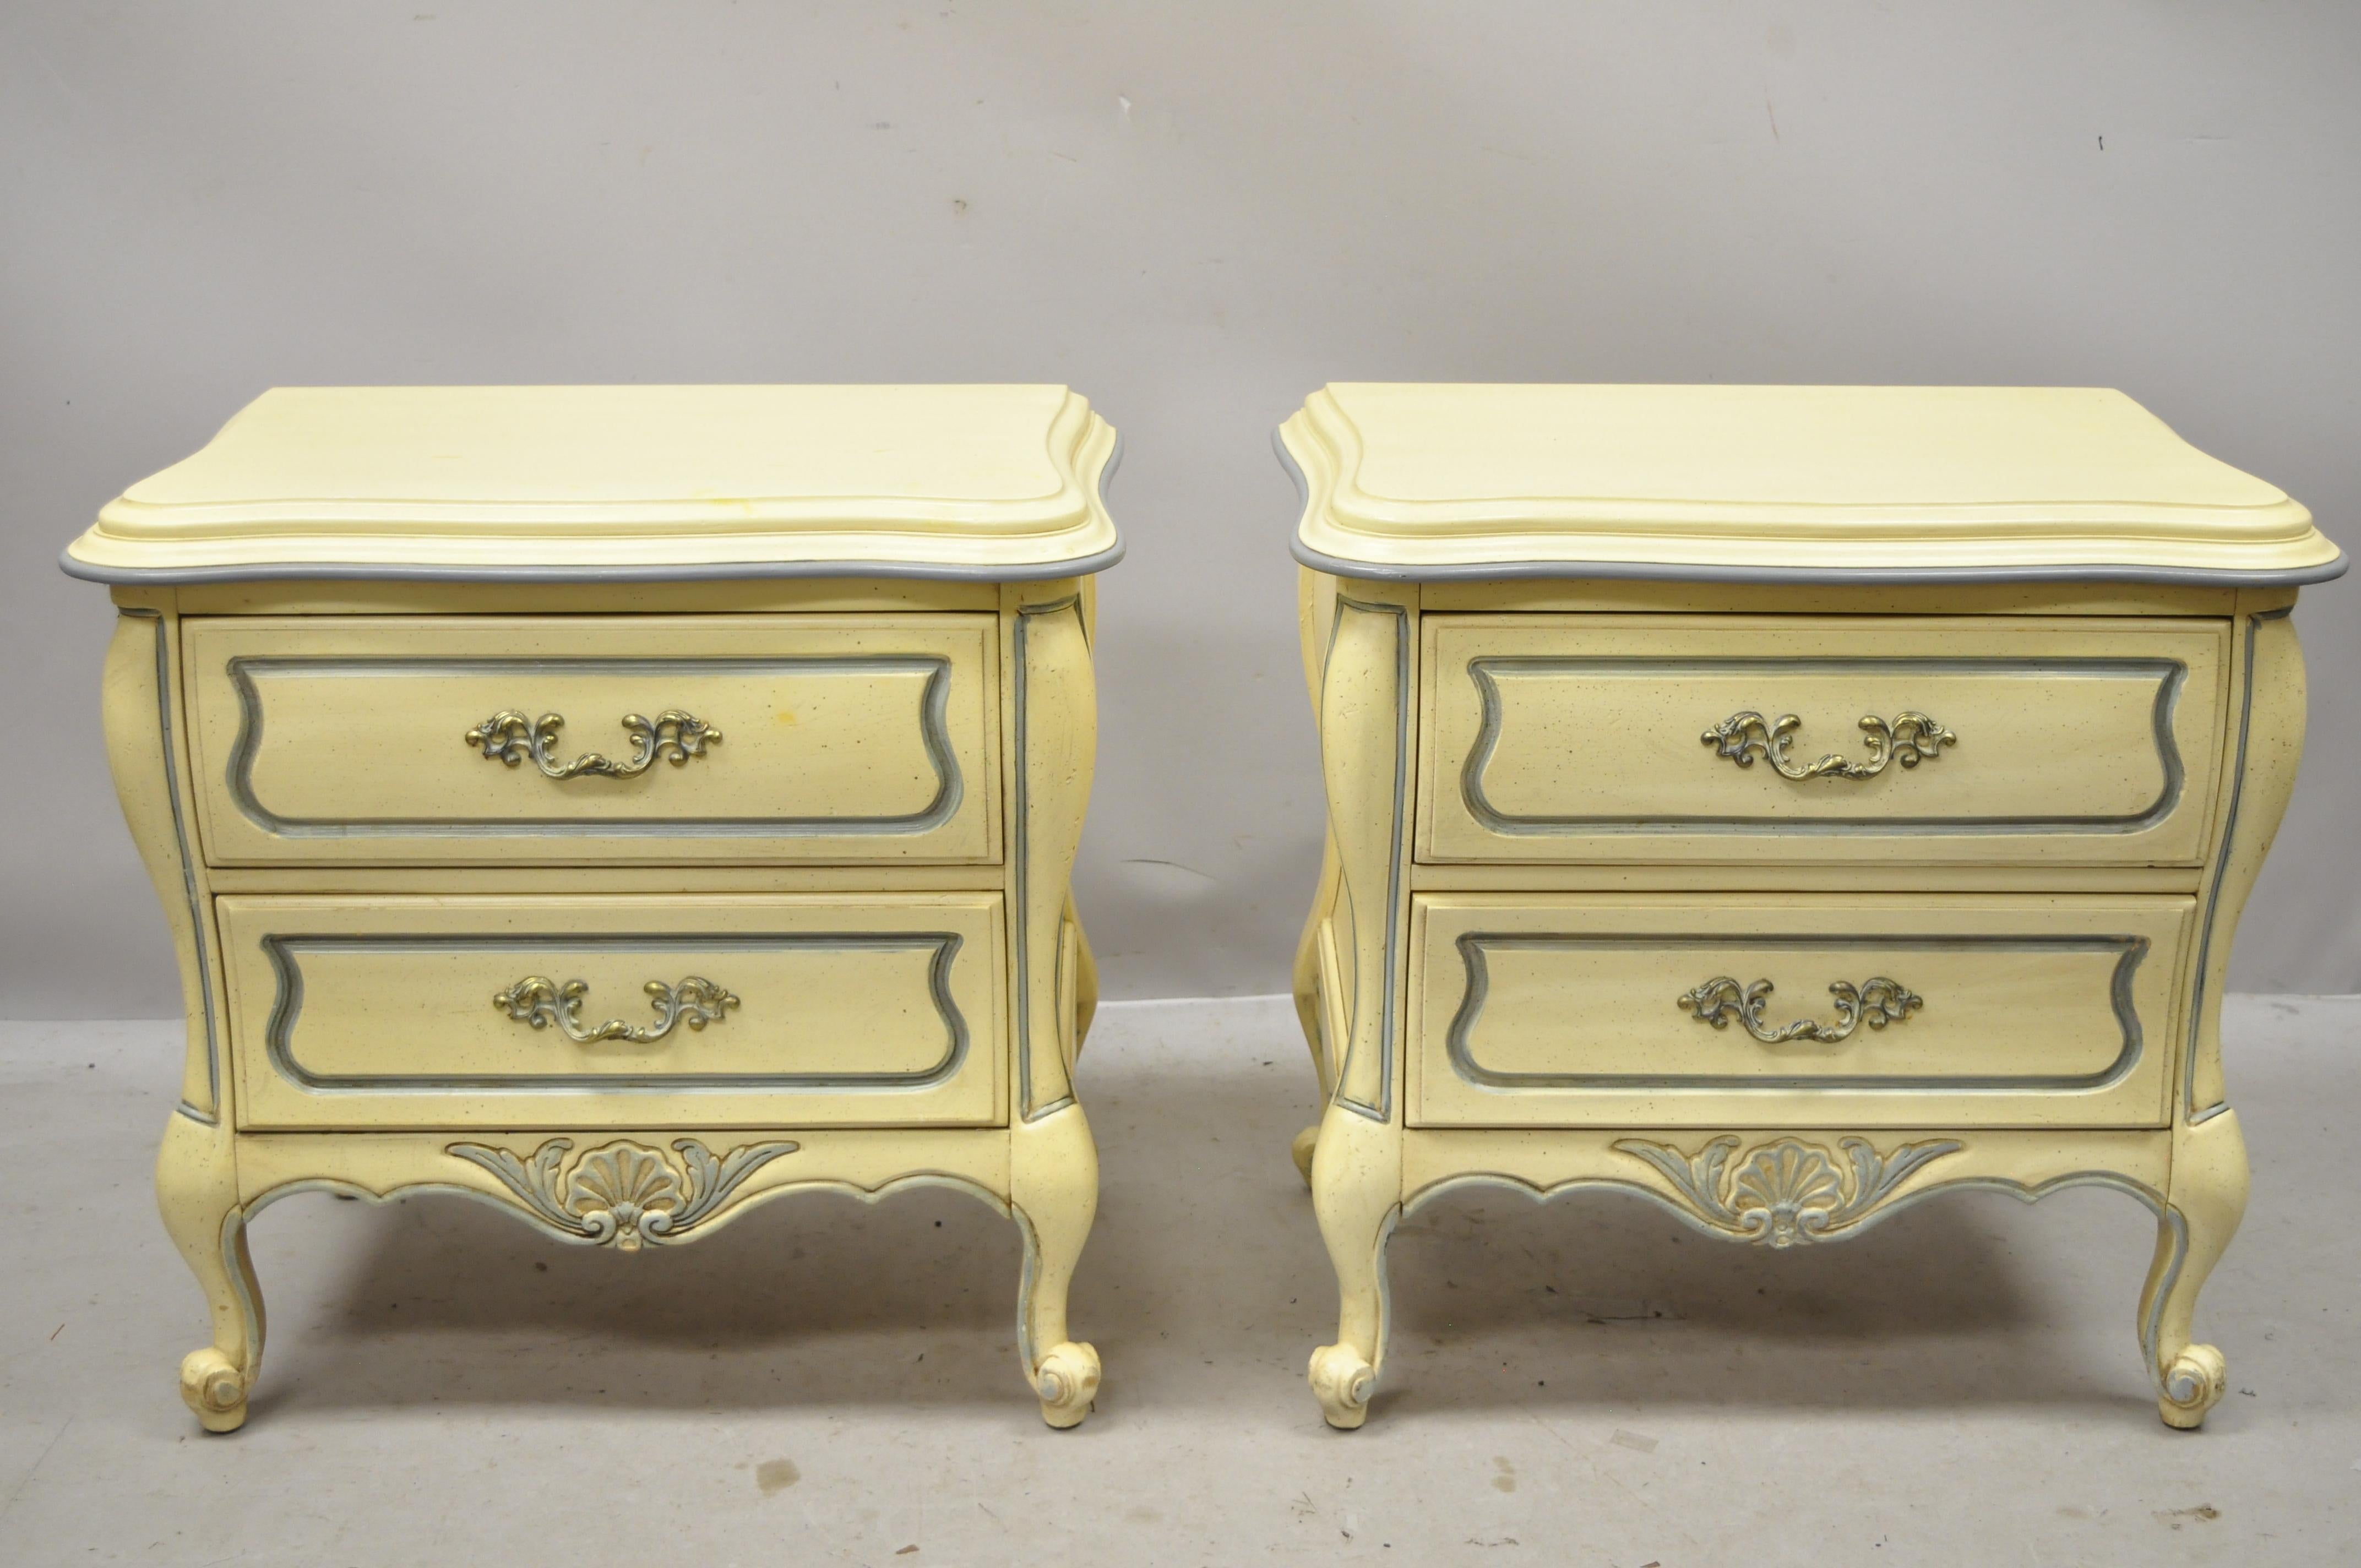 French Provincial Louis XV country style cream lacquer bombe nightstands tables, a pair. Item features cream painted finish with blue trim, shell carved accents, 2 dovetailed drawers, cabriole legs, solid brass hardware, very nice vintage item,